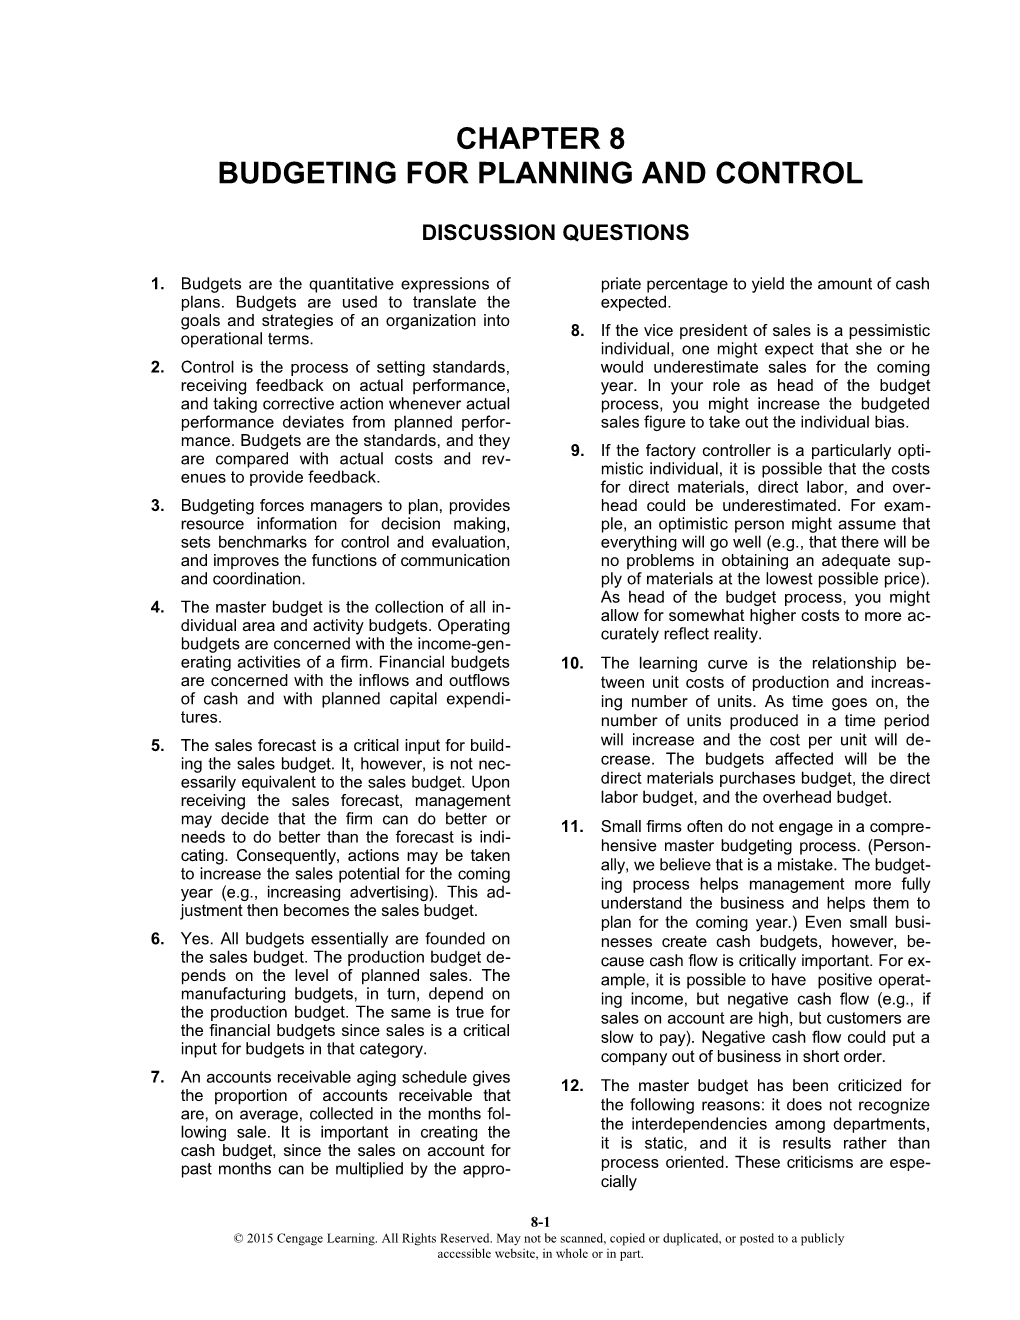 Budgeting for Planning and Control